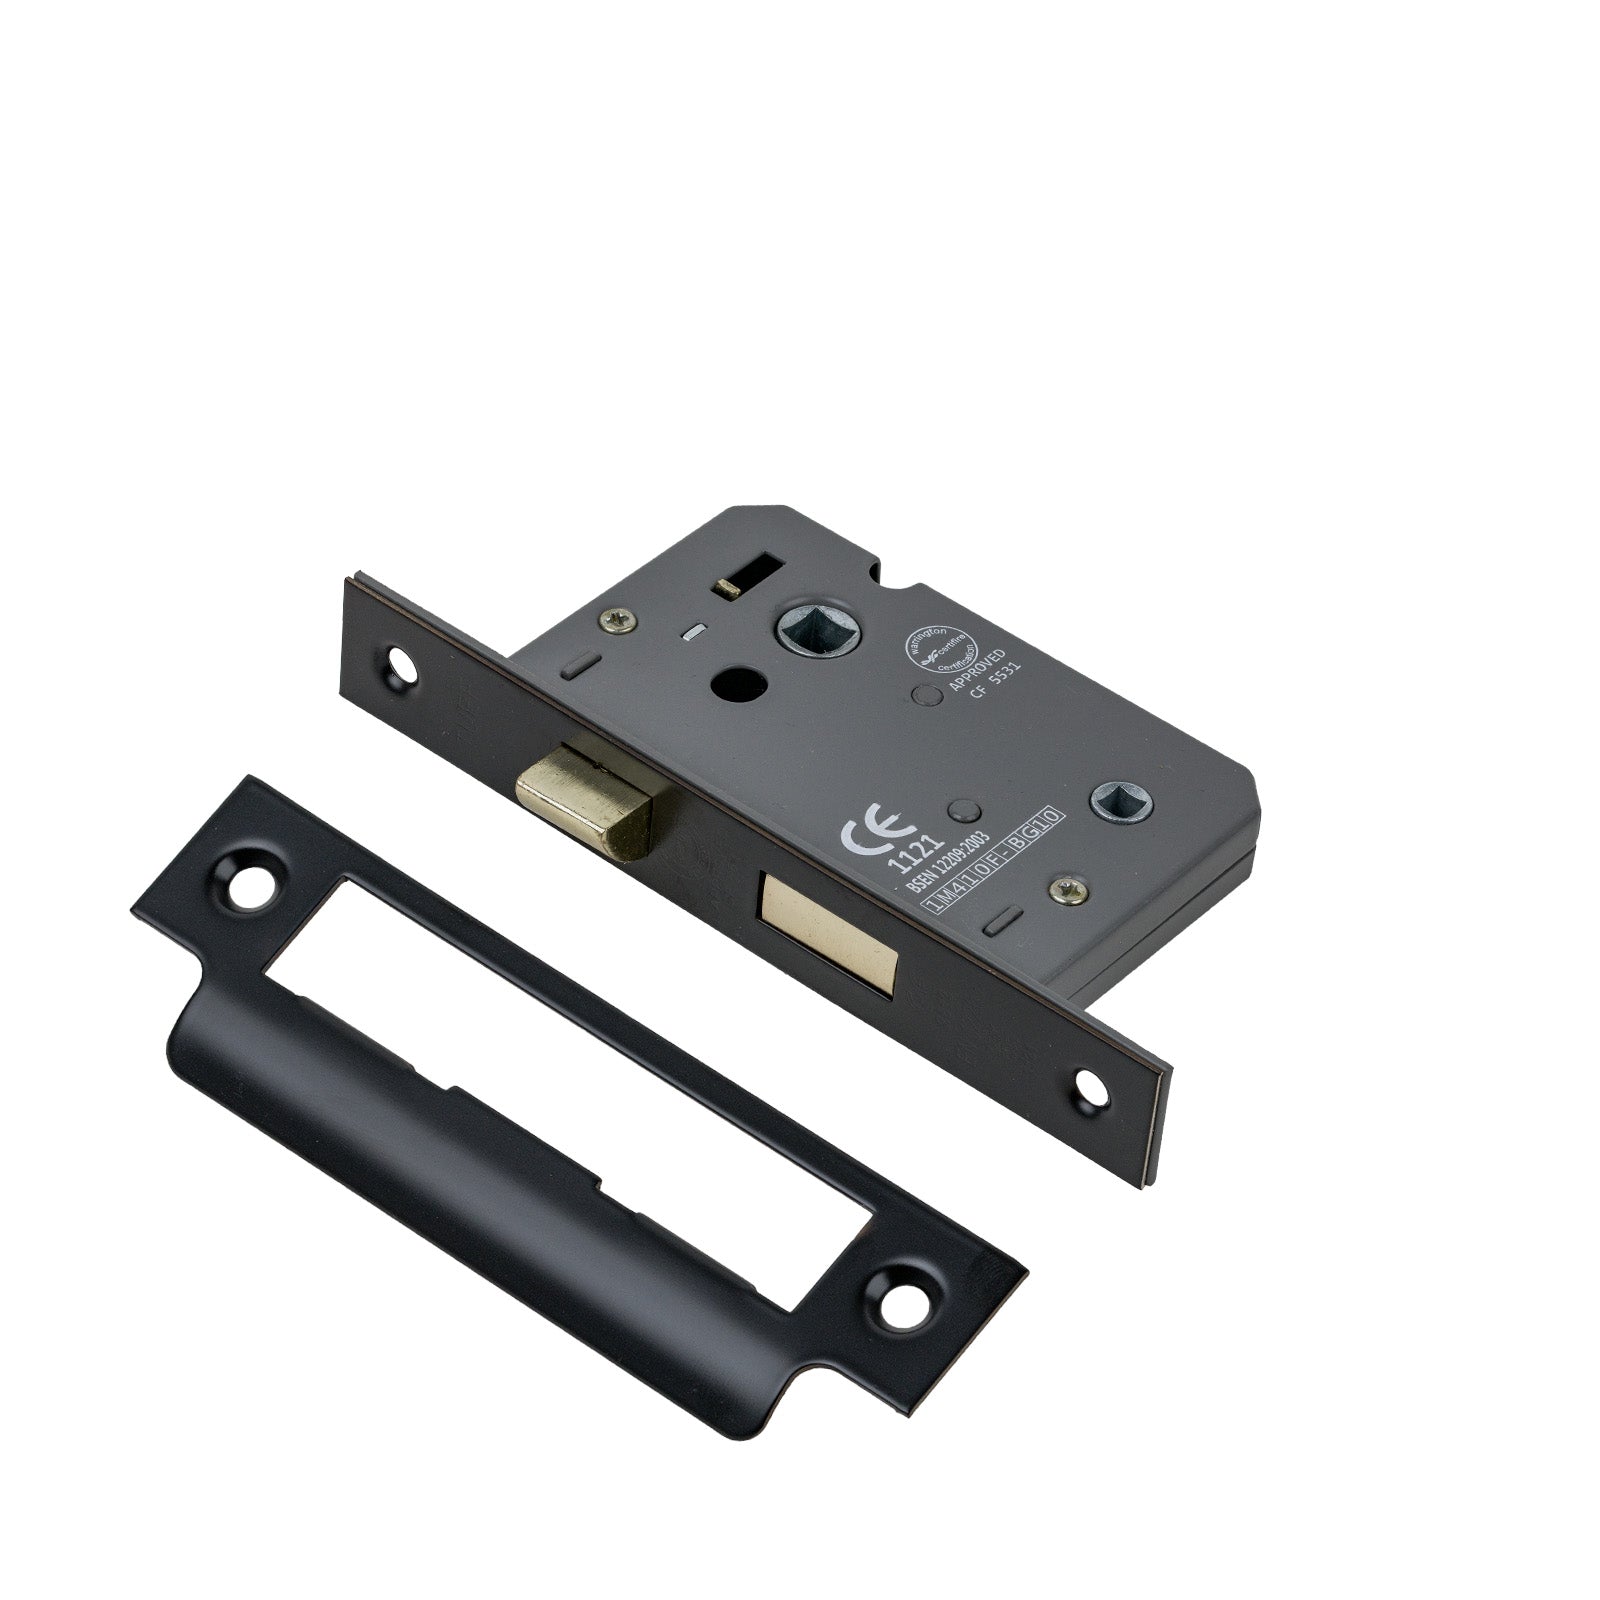 SHOW Bathroom Sash Lock - 2.5 Inch with Matt Bronze finished forend and striker plate